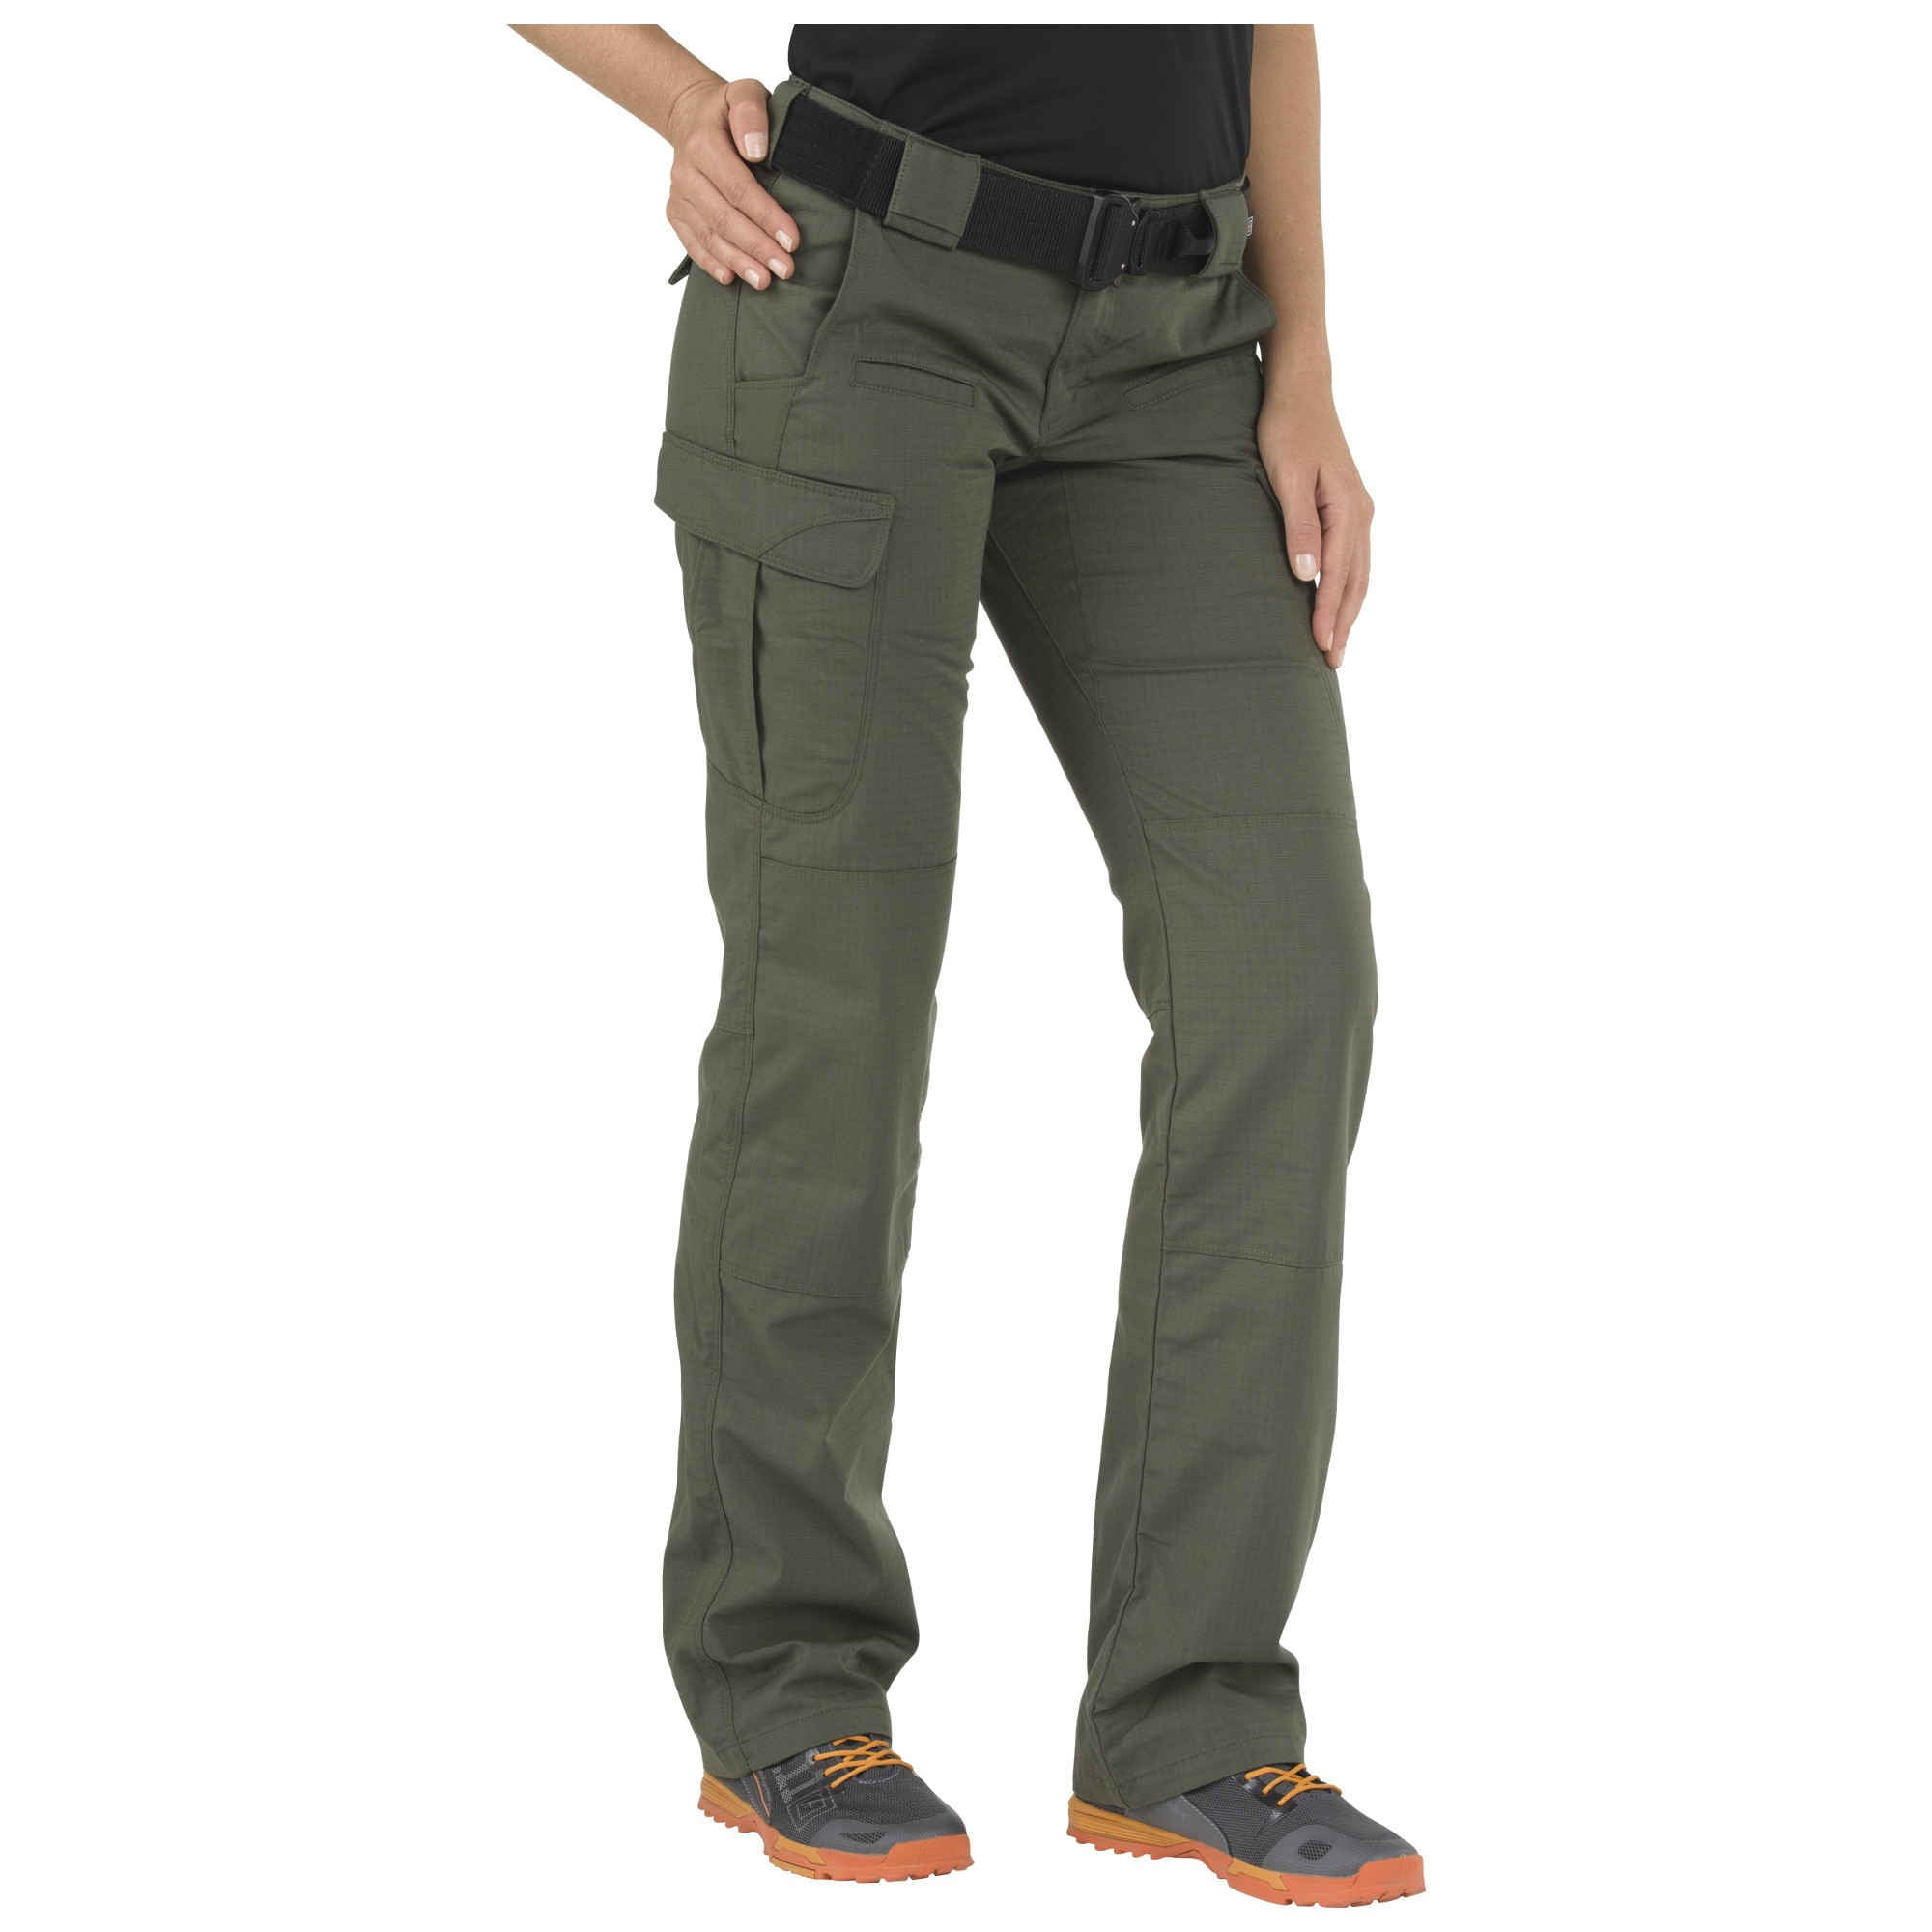 Stretchable Style 64386 5.11 Tactical Women's Stryke Covert Cargo Pants Gusseted Construction 